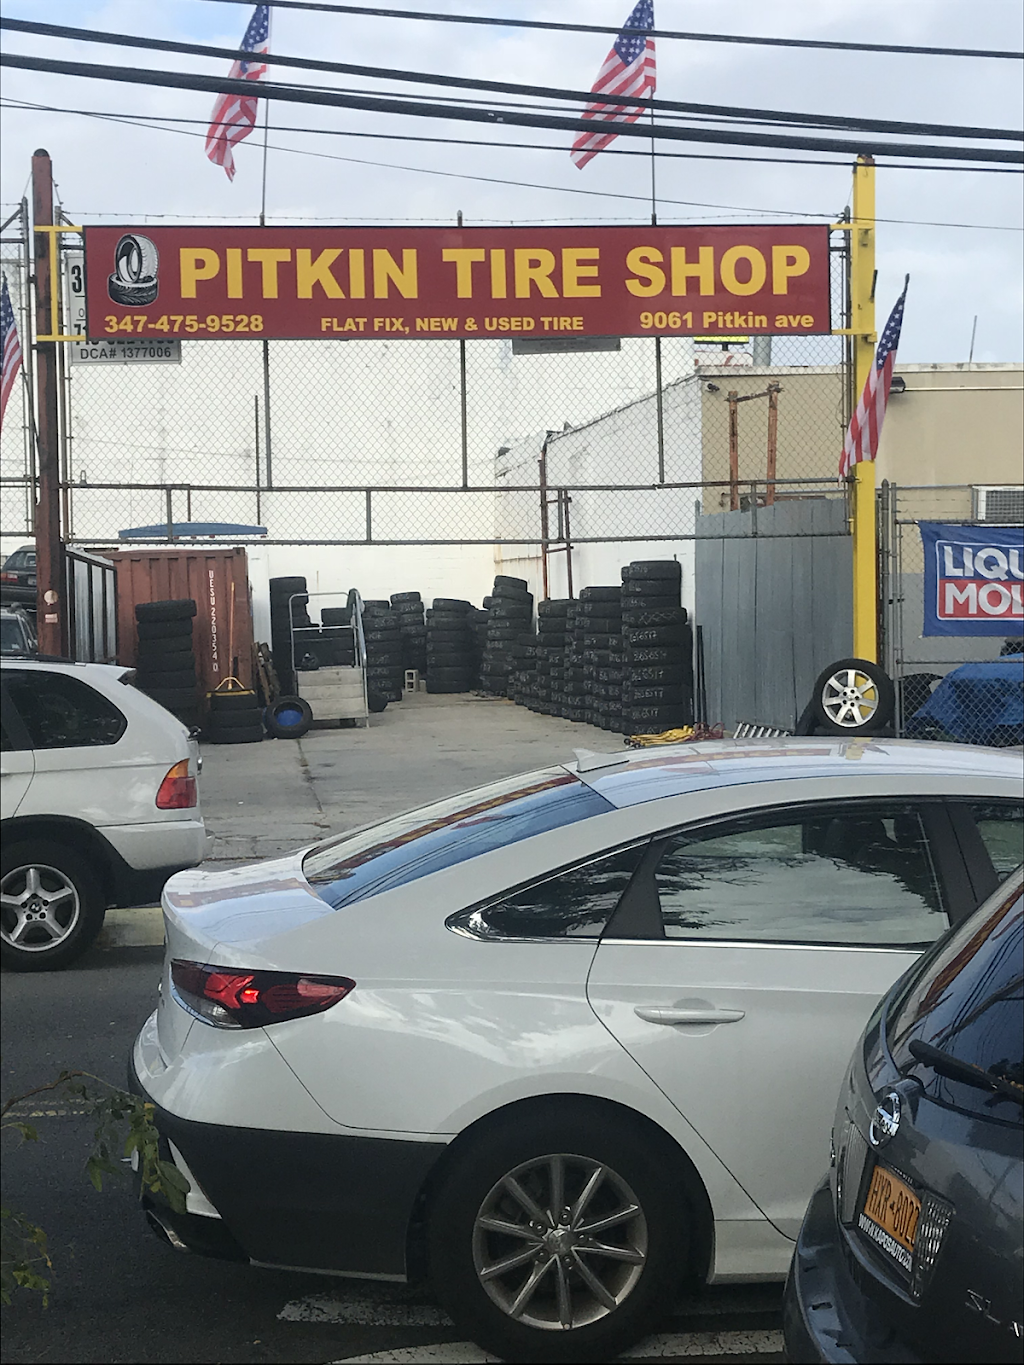 24 HOURS TIRE SHOP, FIX FLAT# PITKIN TIRE SHOP | 9061 Pitkin Ave, Ozone Park, NY 11417 | Phone: (718) 374-3610